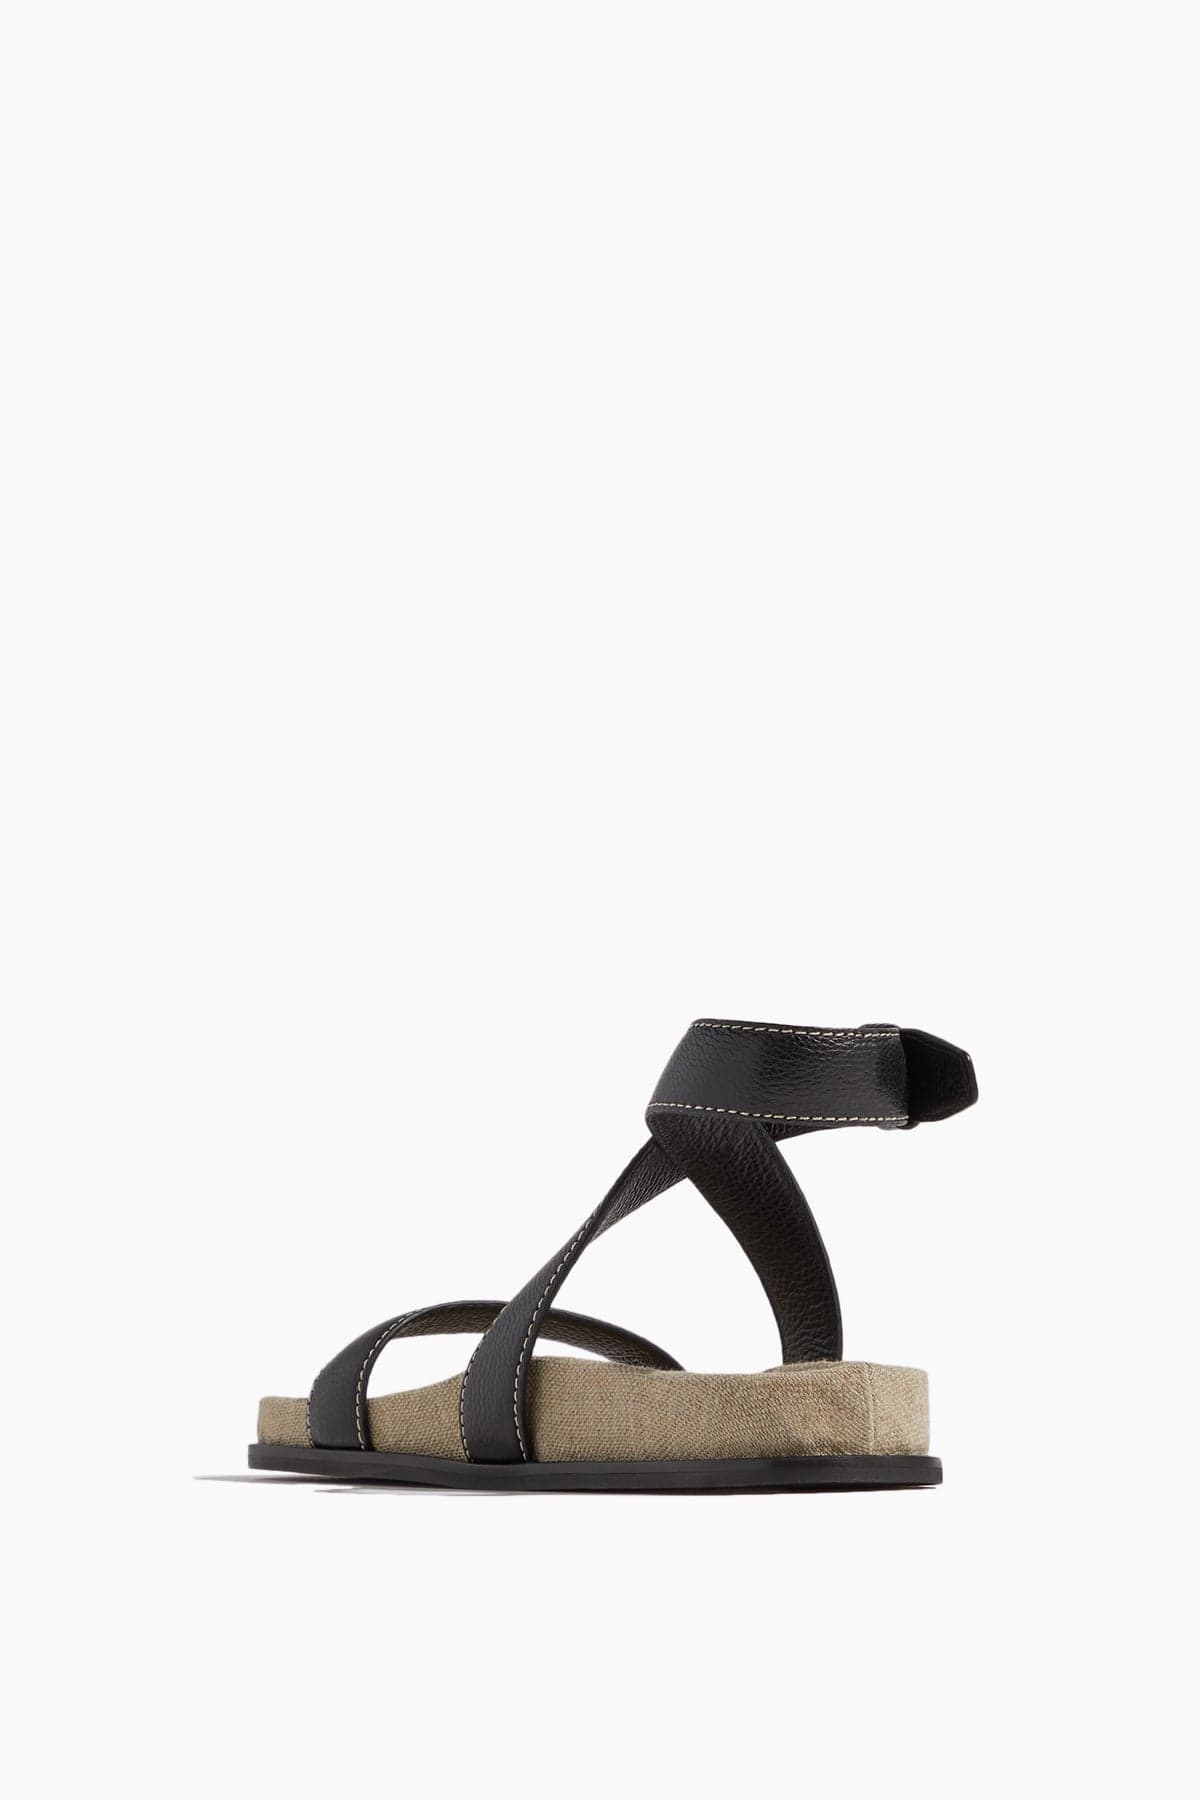 Toteme Strappy Flat Sandals The Leather Chunky Sandal in Black Toteme The Leather Chunky Sandal in Black